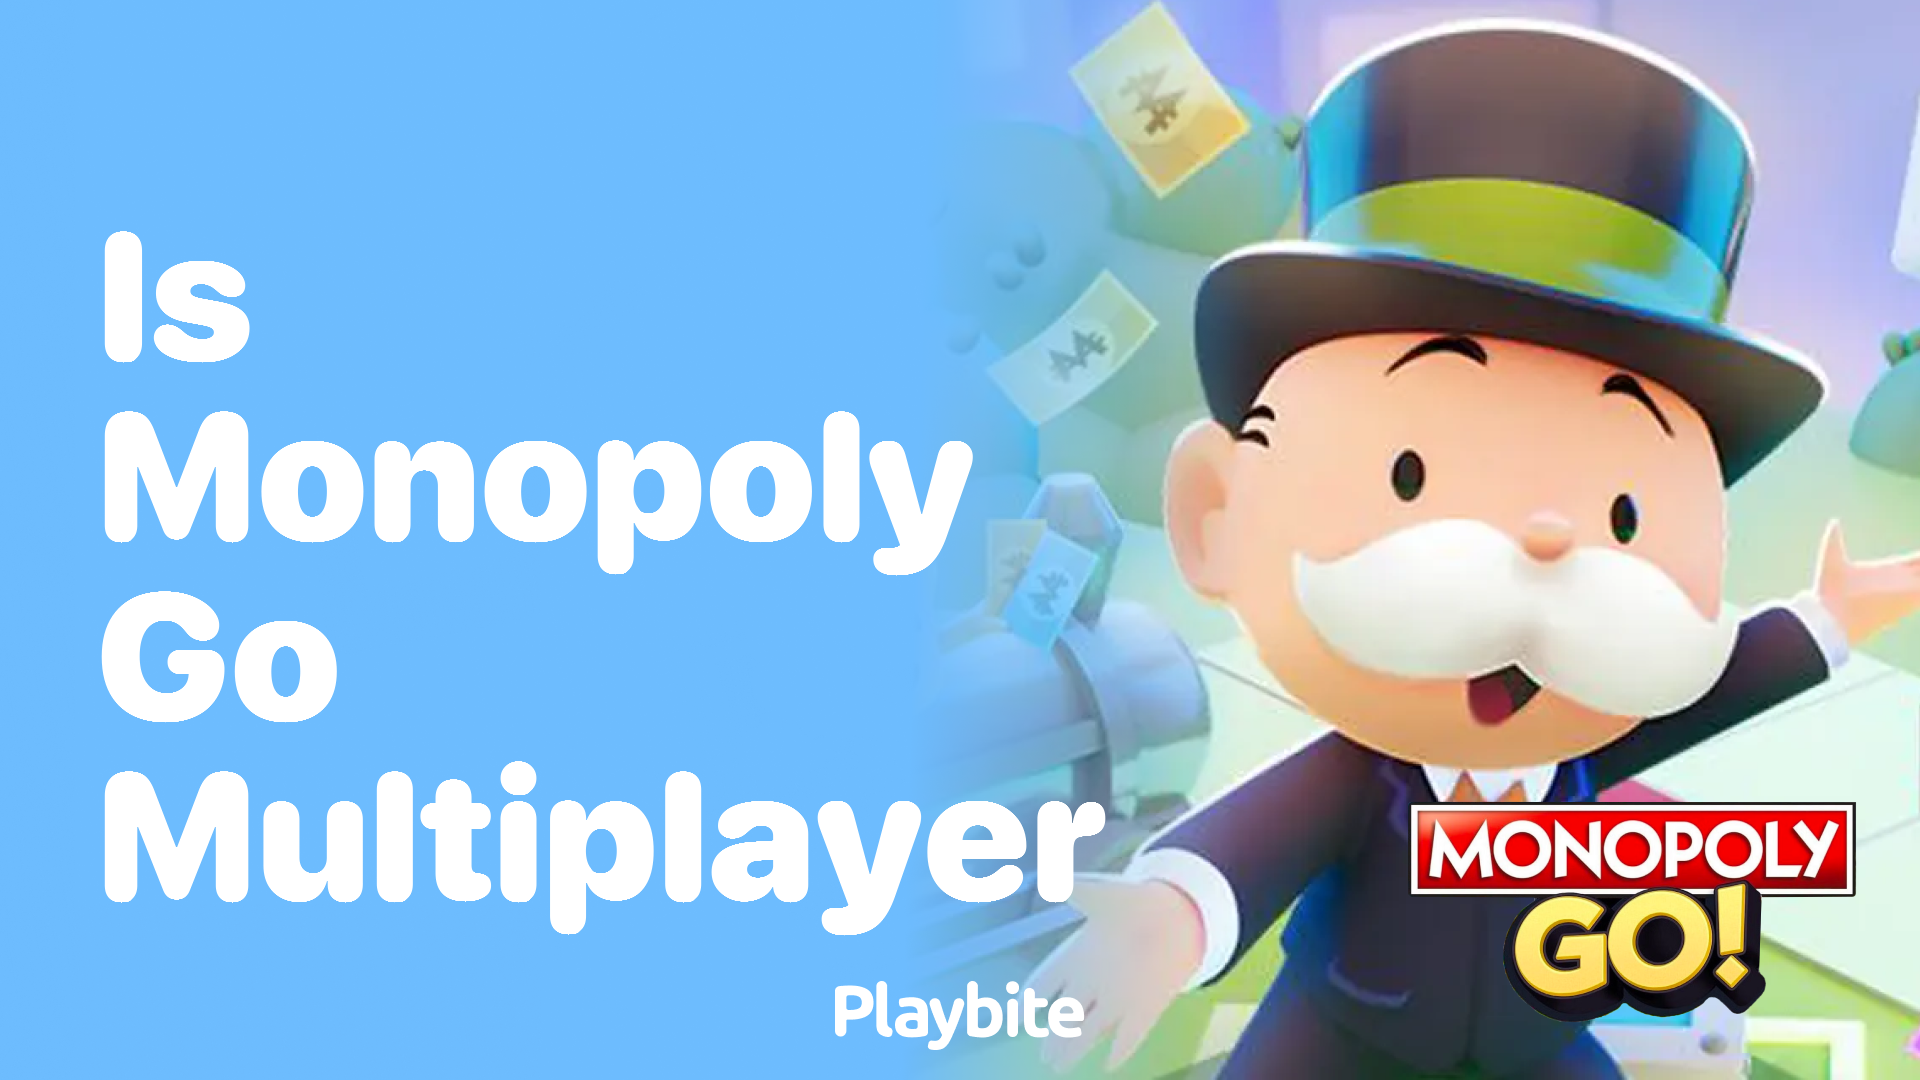 Is Monopoly Go a Multiplayer Game? Find Out Here!